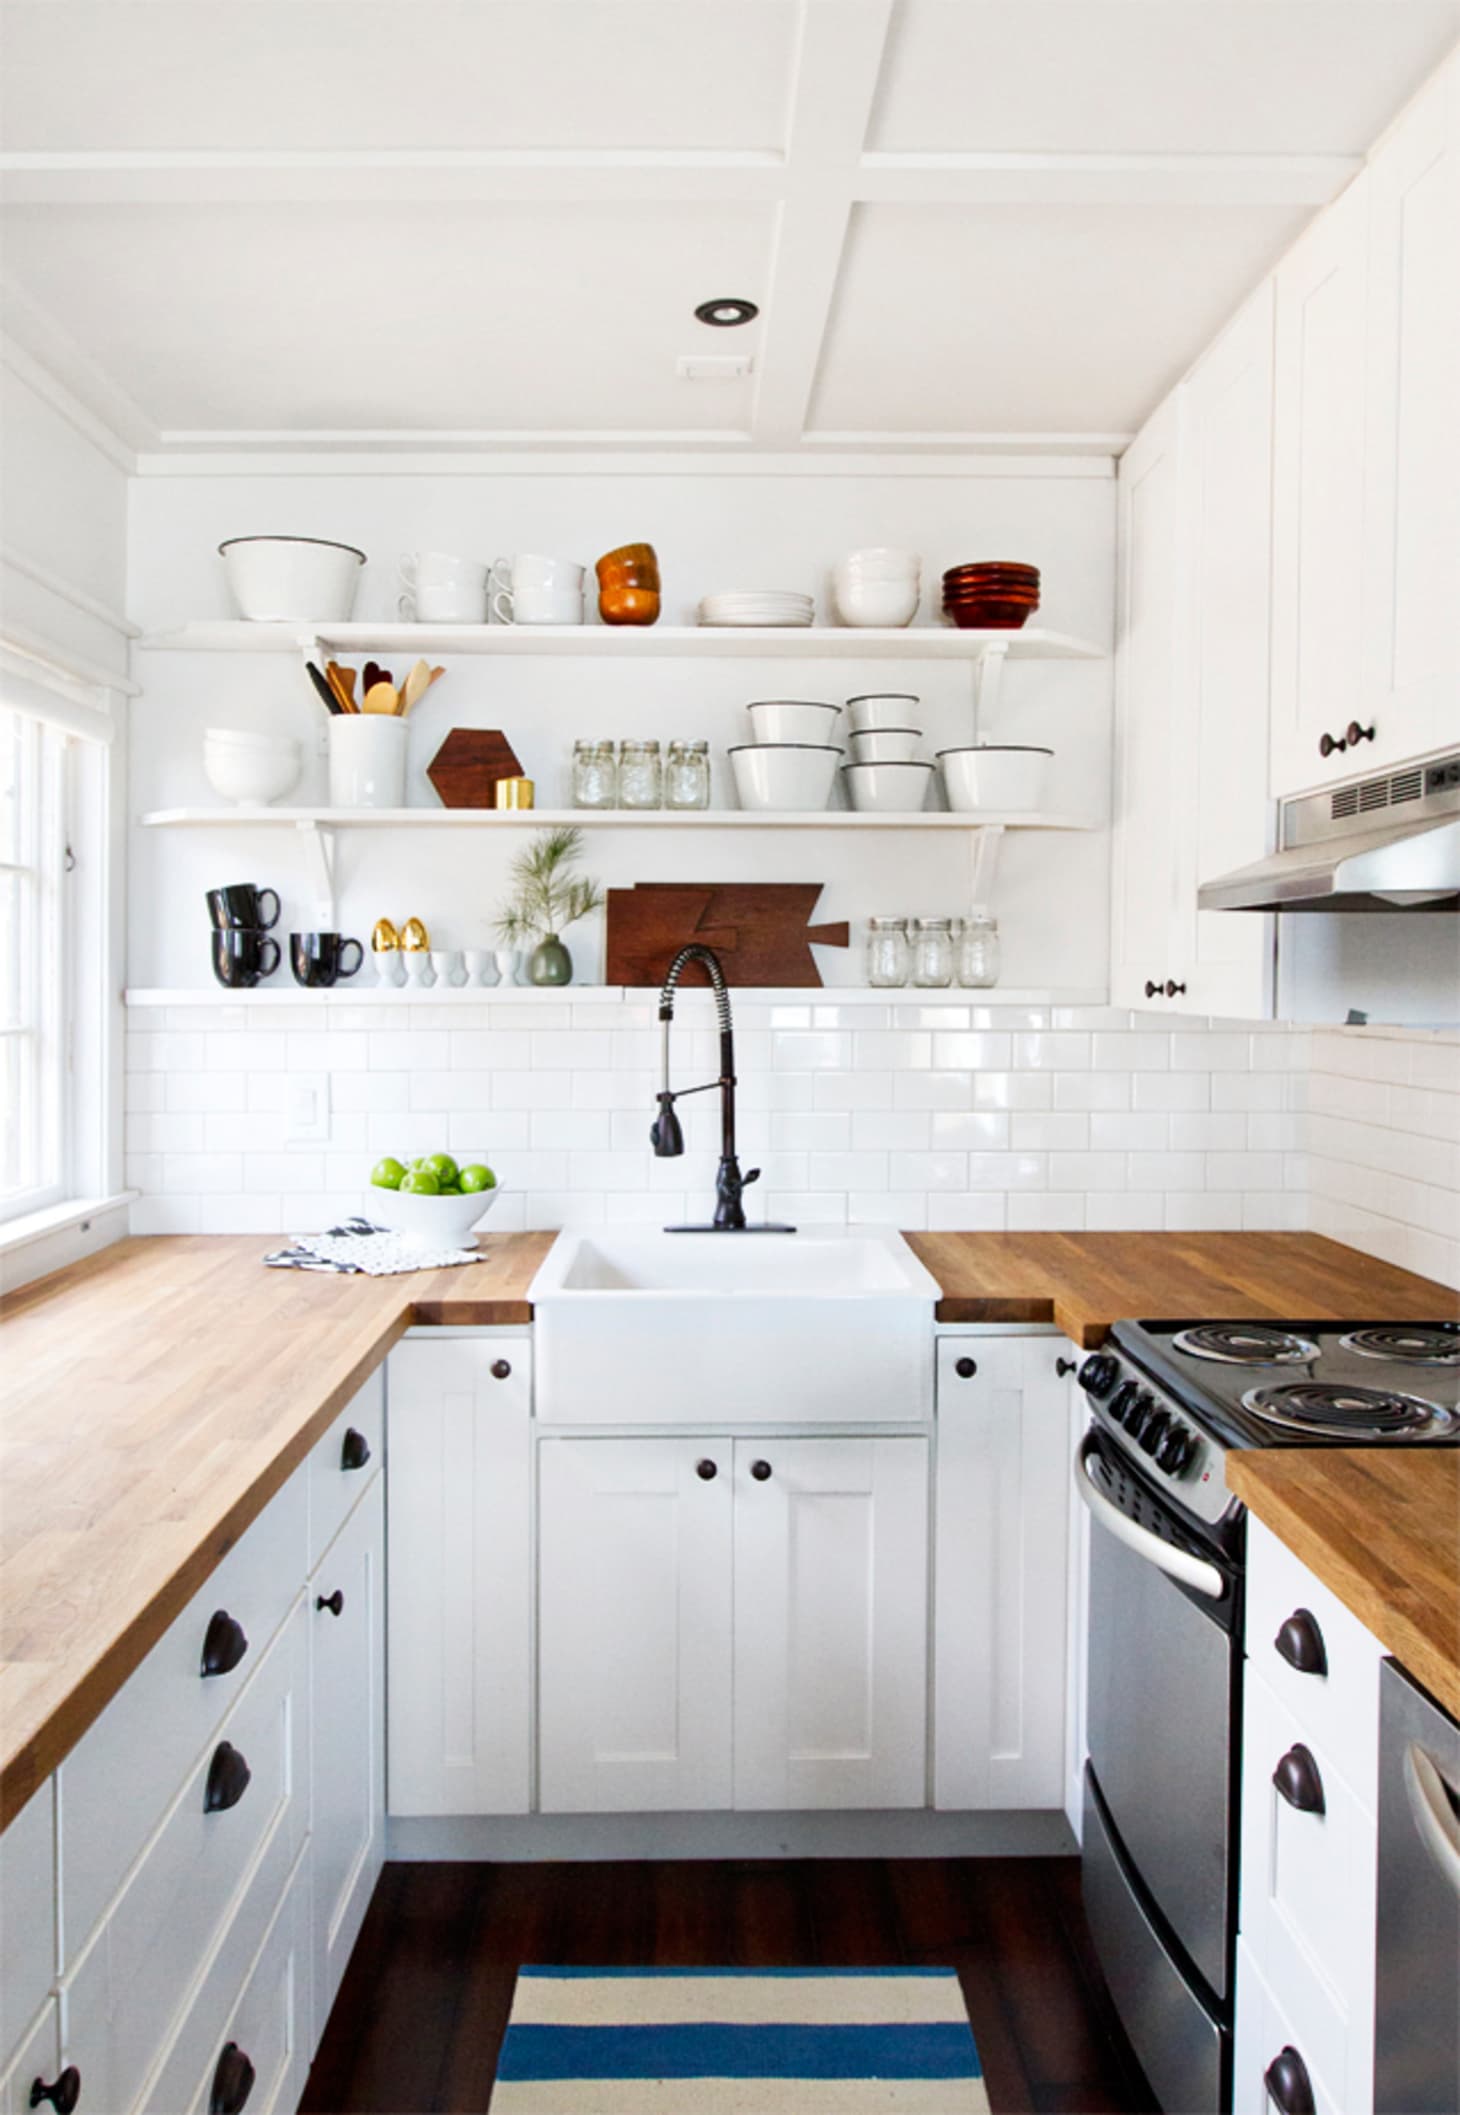 Butcher Block Countertops Are Beauty On A Budget Apartment Therapy